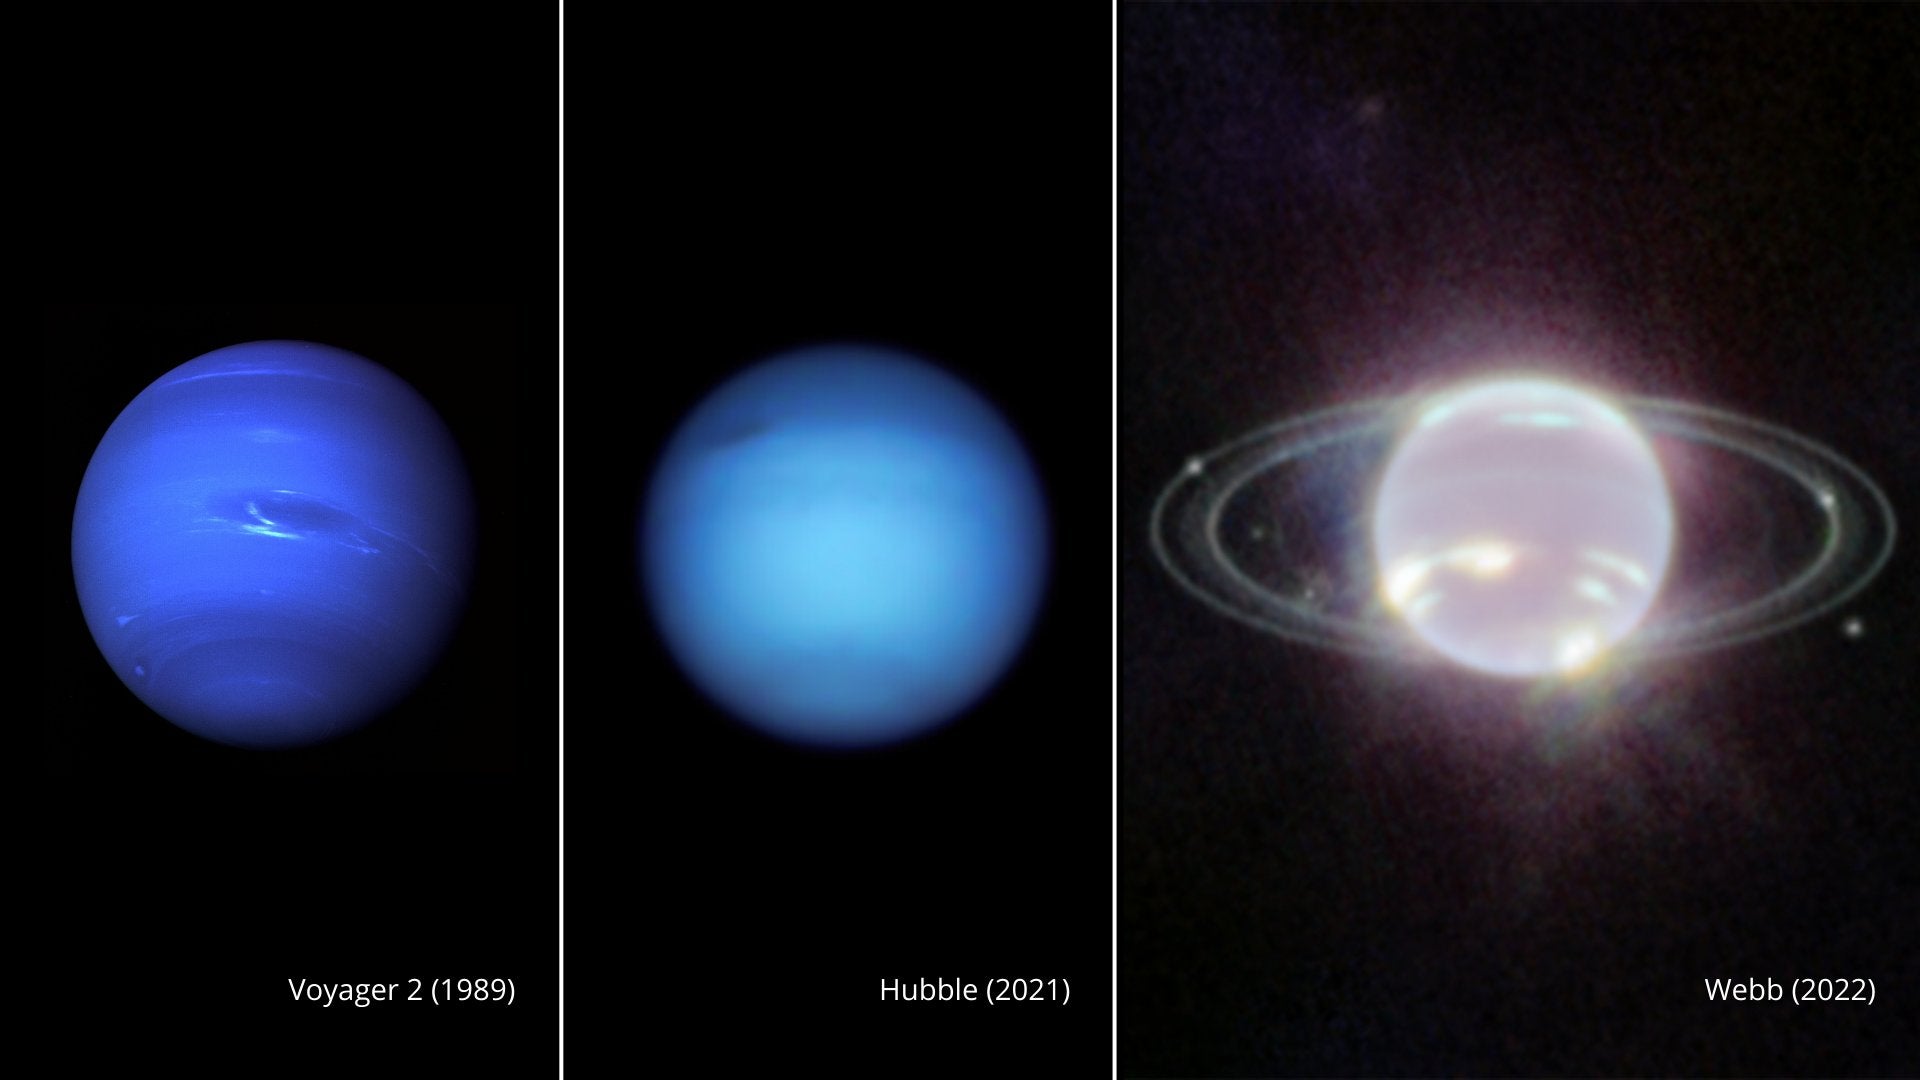 Neptune as seen in visible light by the Voyager 2 spacecraft and the Hubble Space Telescope, and now in infrared light in the newest image from the James Webb Space Telescope